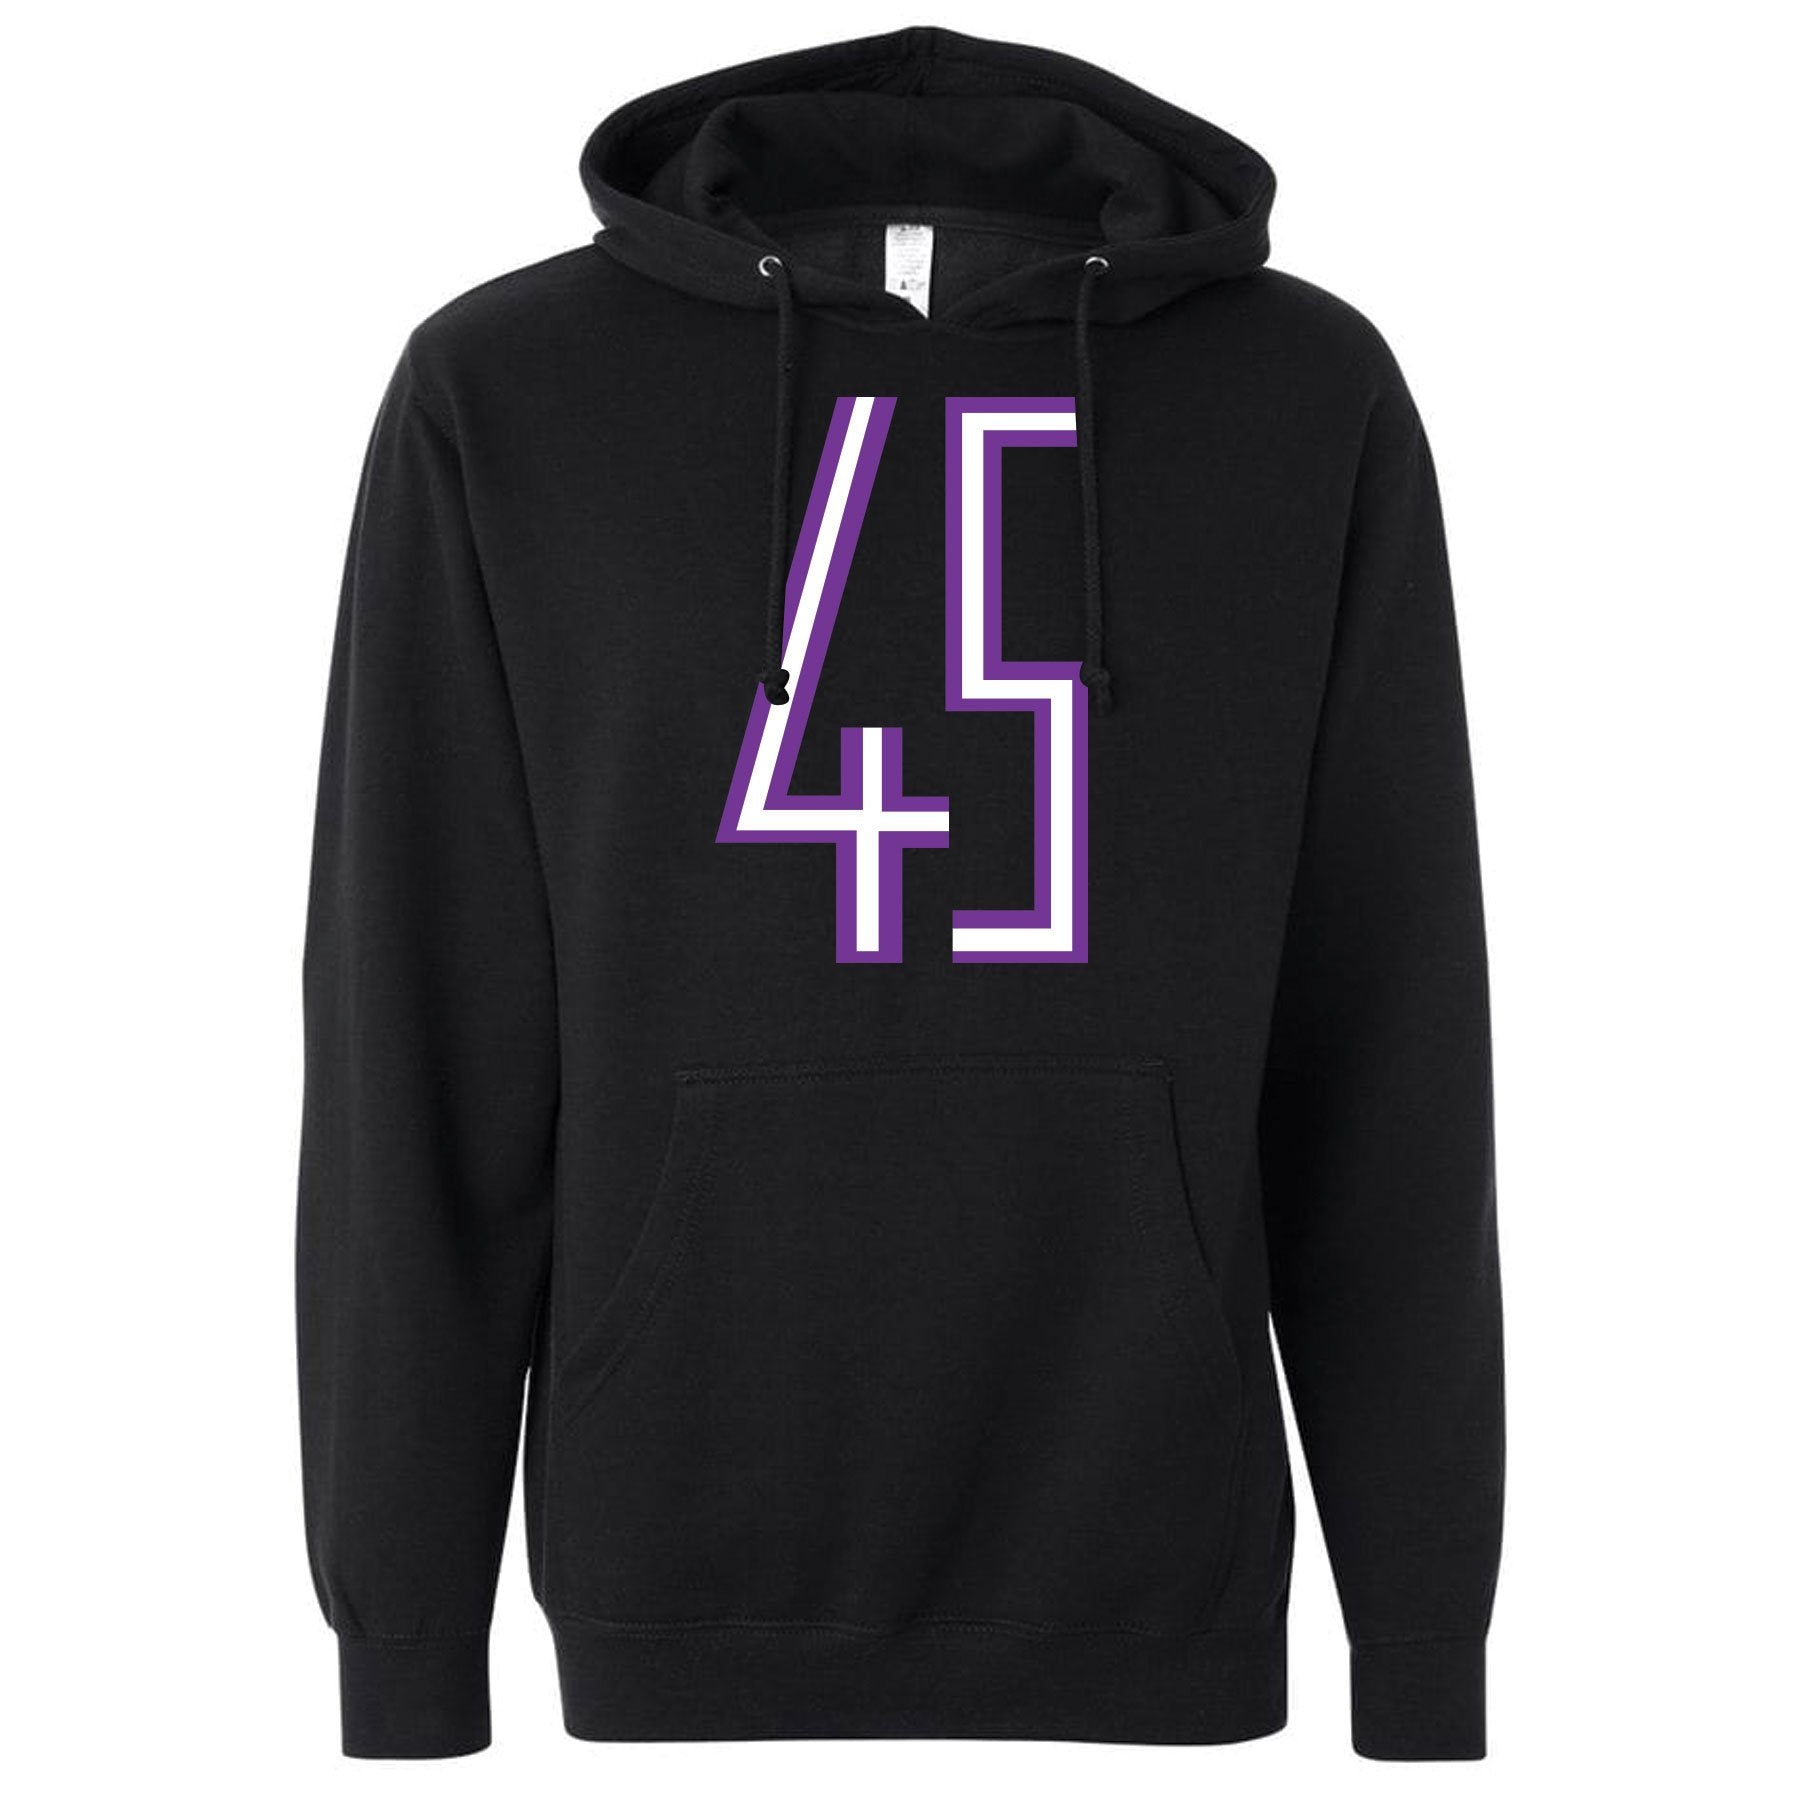 Printed on the front of the Jordan 11 Concord 45 sneaker matching black pullover is the 45 logo printed in white and purple